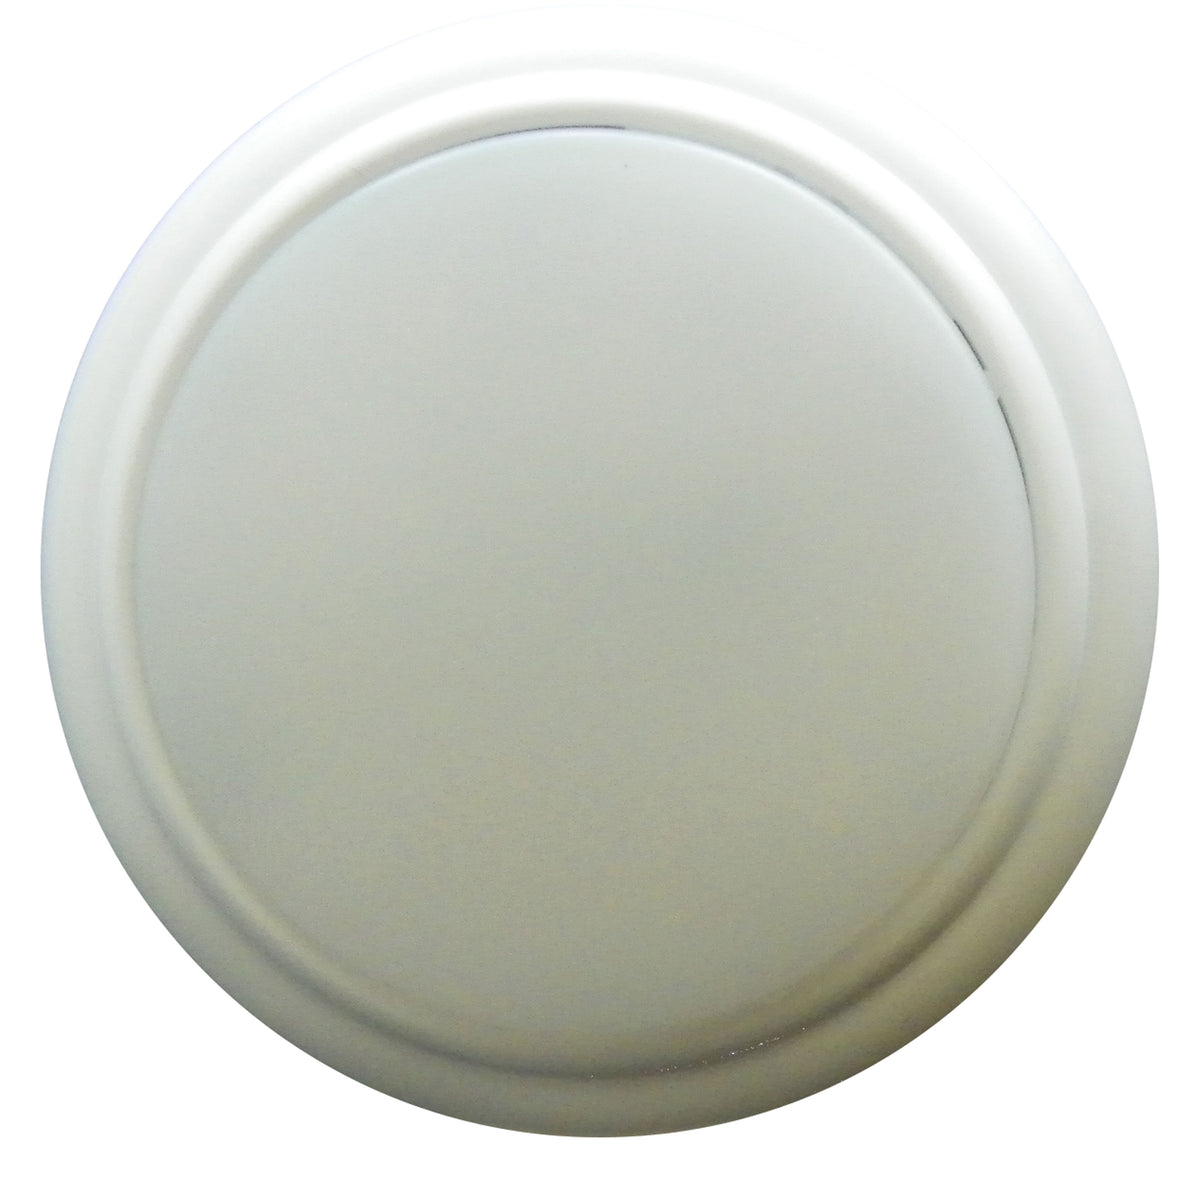 Fasteners Unlimited 001-1003W Surface Mount Round LED Ceiling/Under-Cabinet Light With Switch - White, 3 in. x 0.5 in. CMD-001-1003W